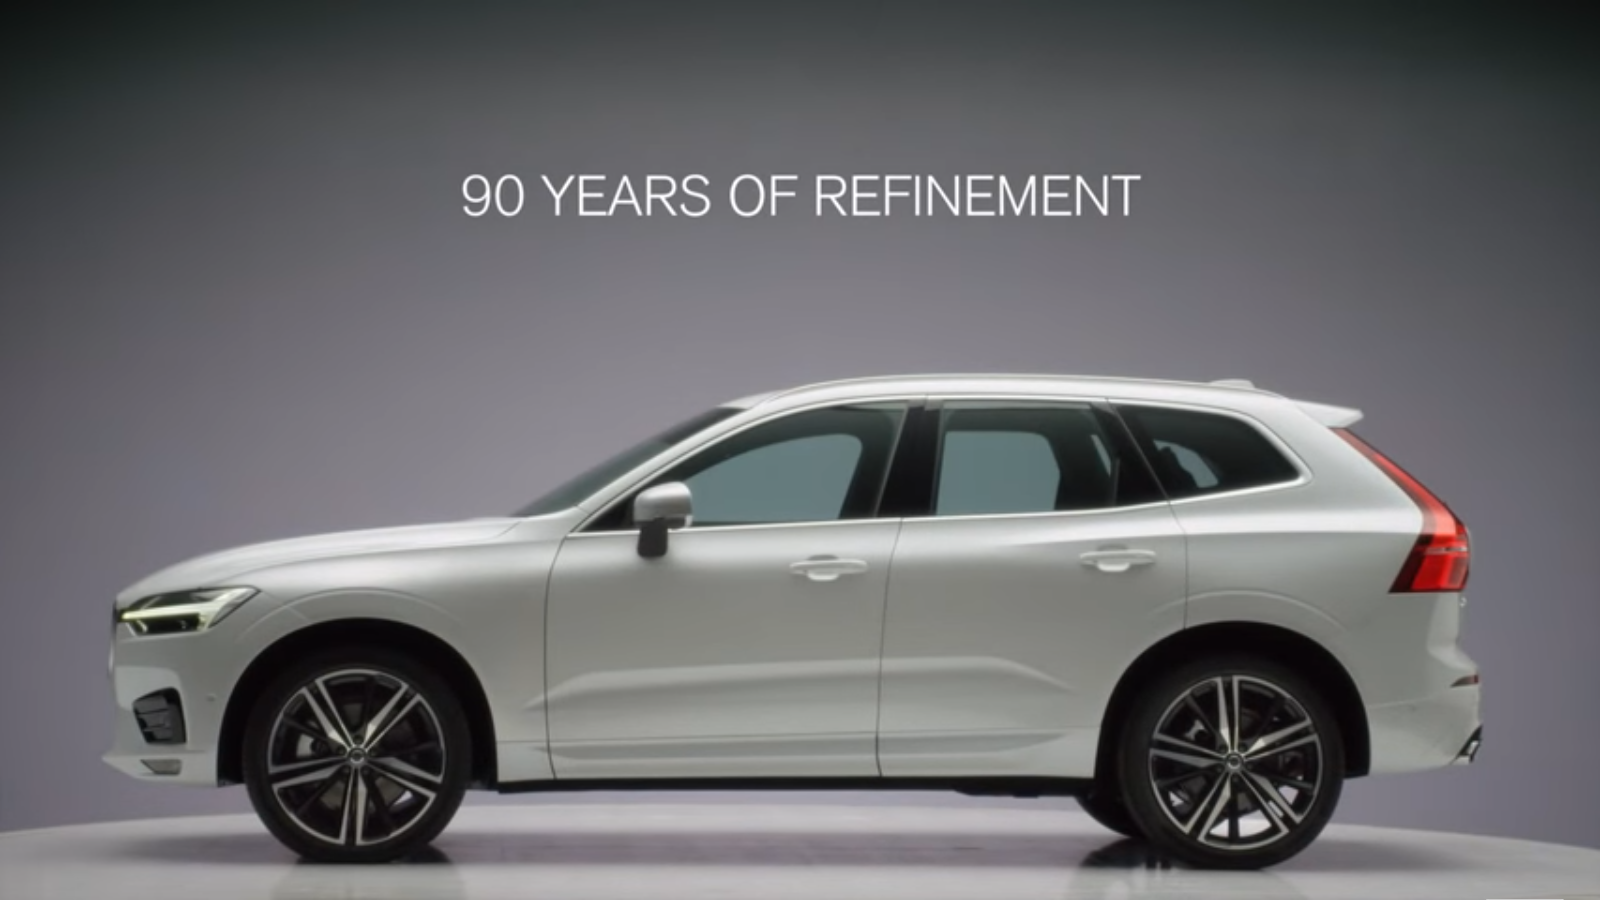 Volvo Celebrates 90 Years of Refinement With This Video